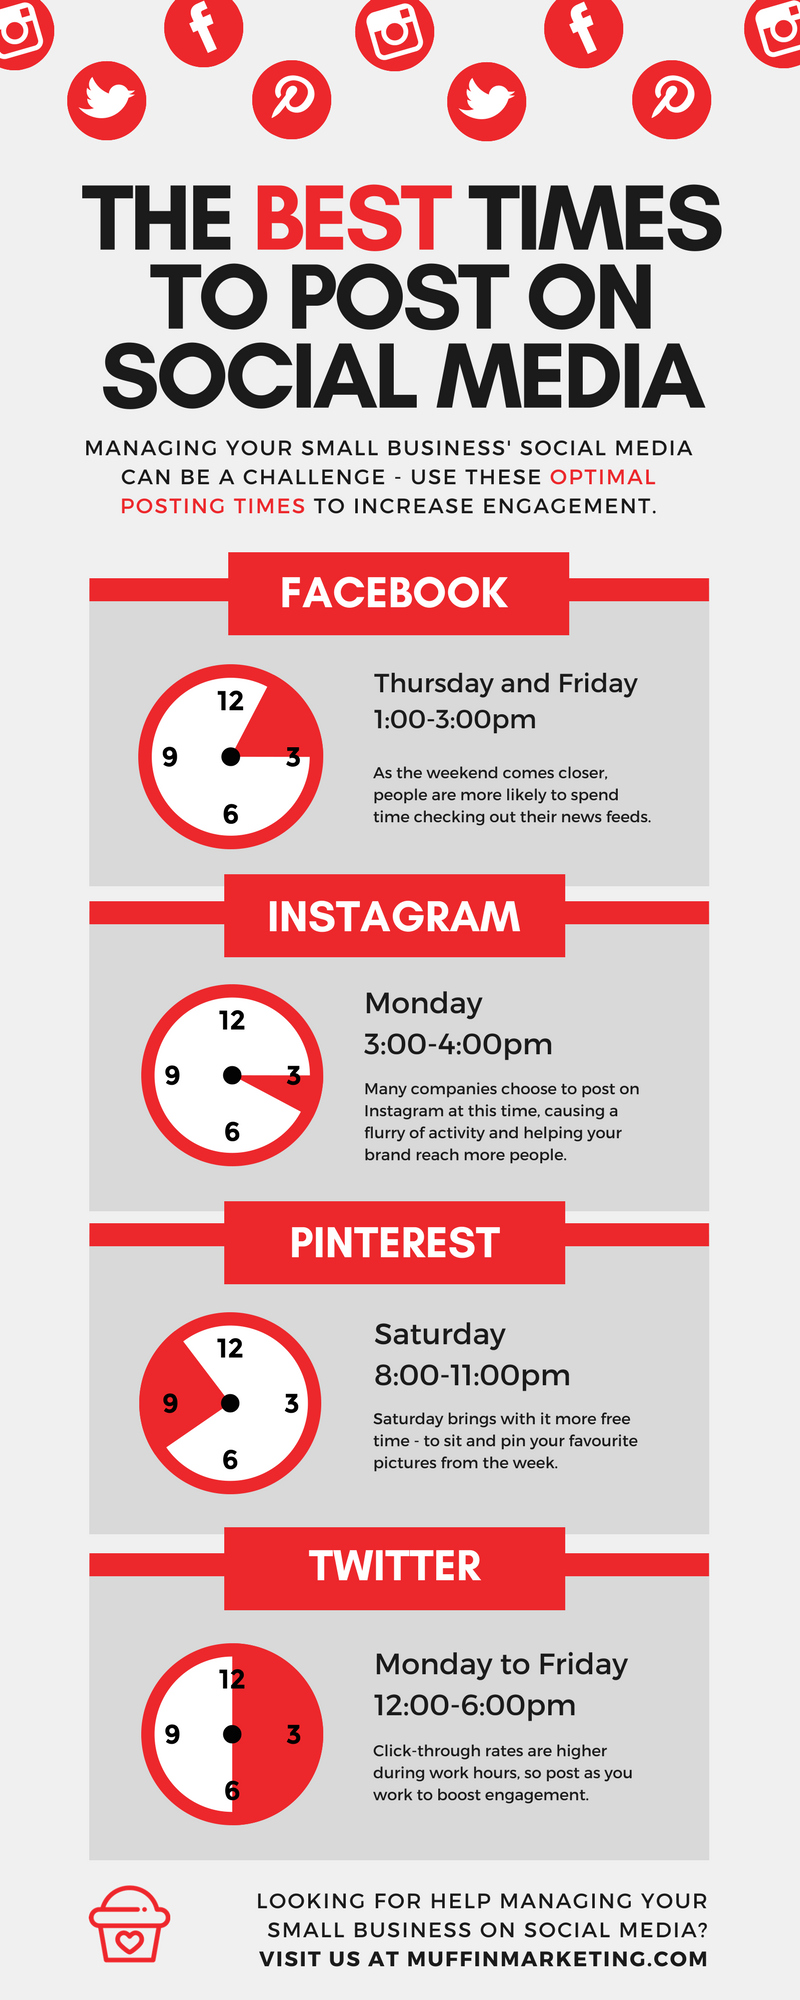 When Are the Best Times to Post New Content on Social Media? [Infographic]